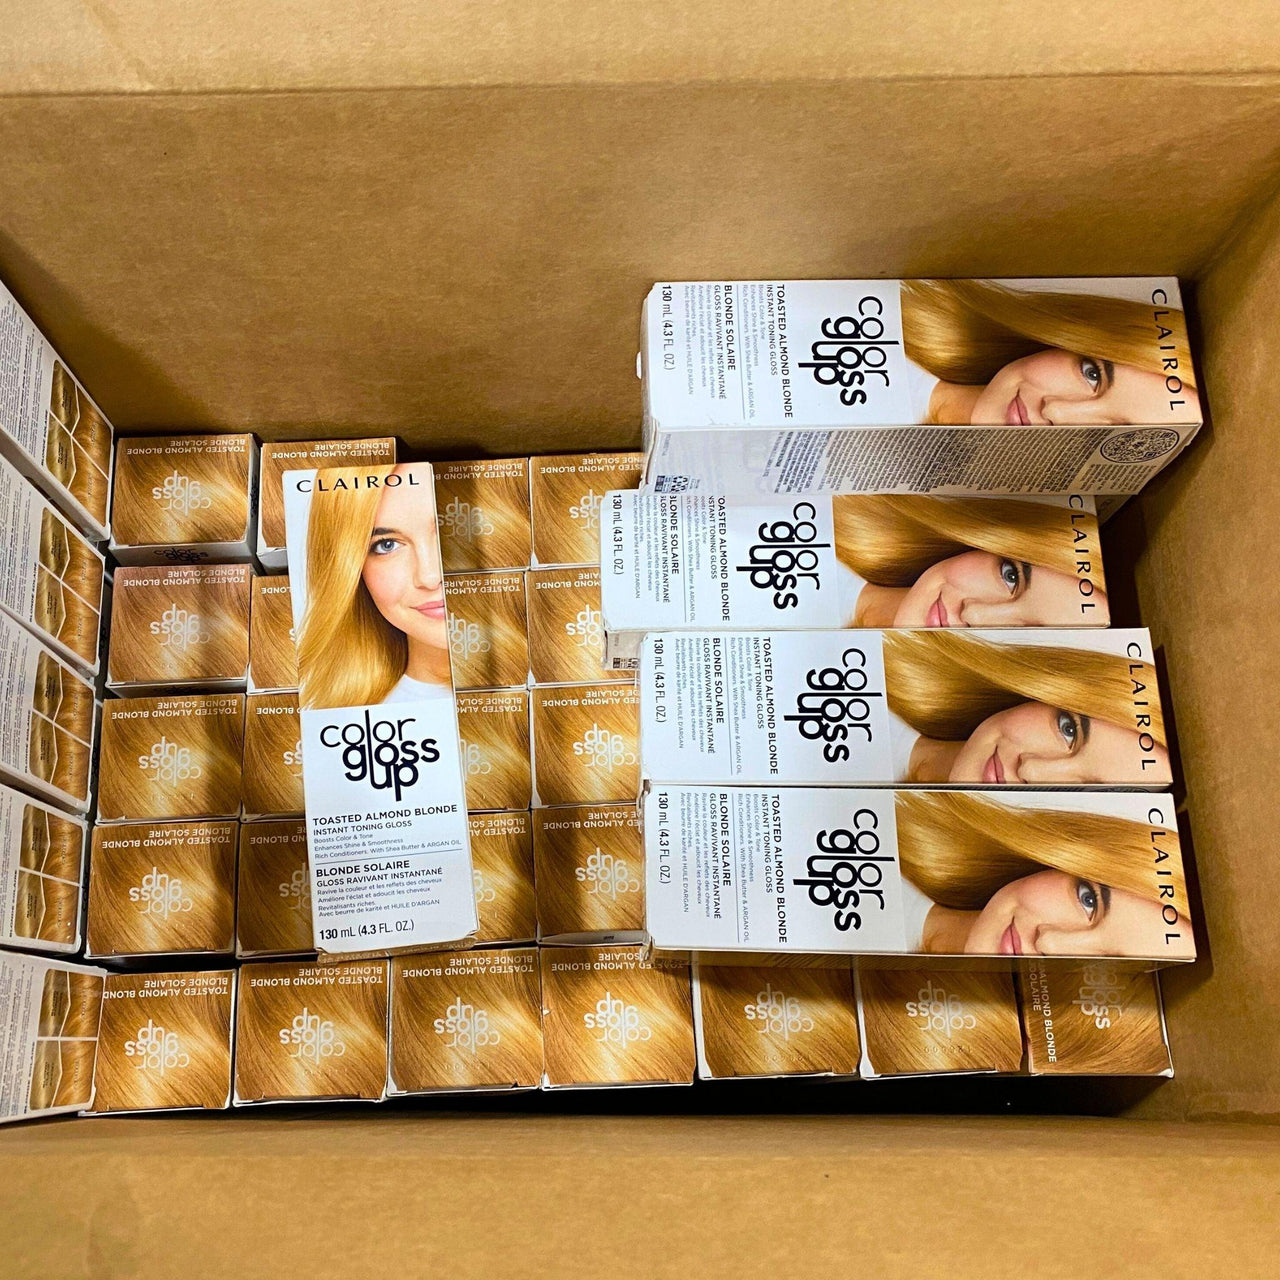 Clairol Color Gloss Up TOASTED ALMOND BLONDE Instant Toning 130ml 4.3 el. Oz (50 Pcs Lot) - Discount Wholesalers Inc